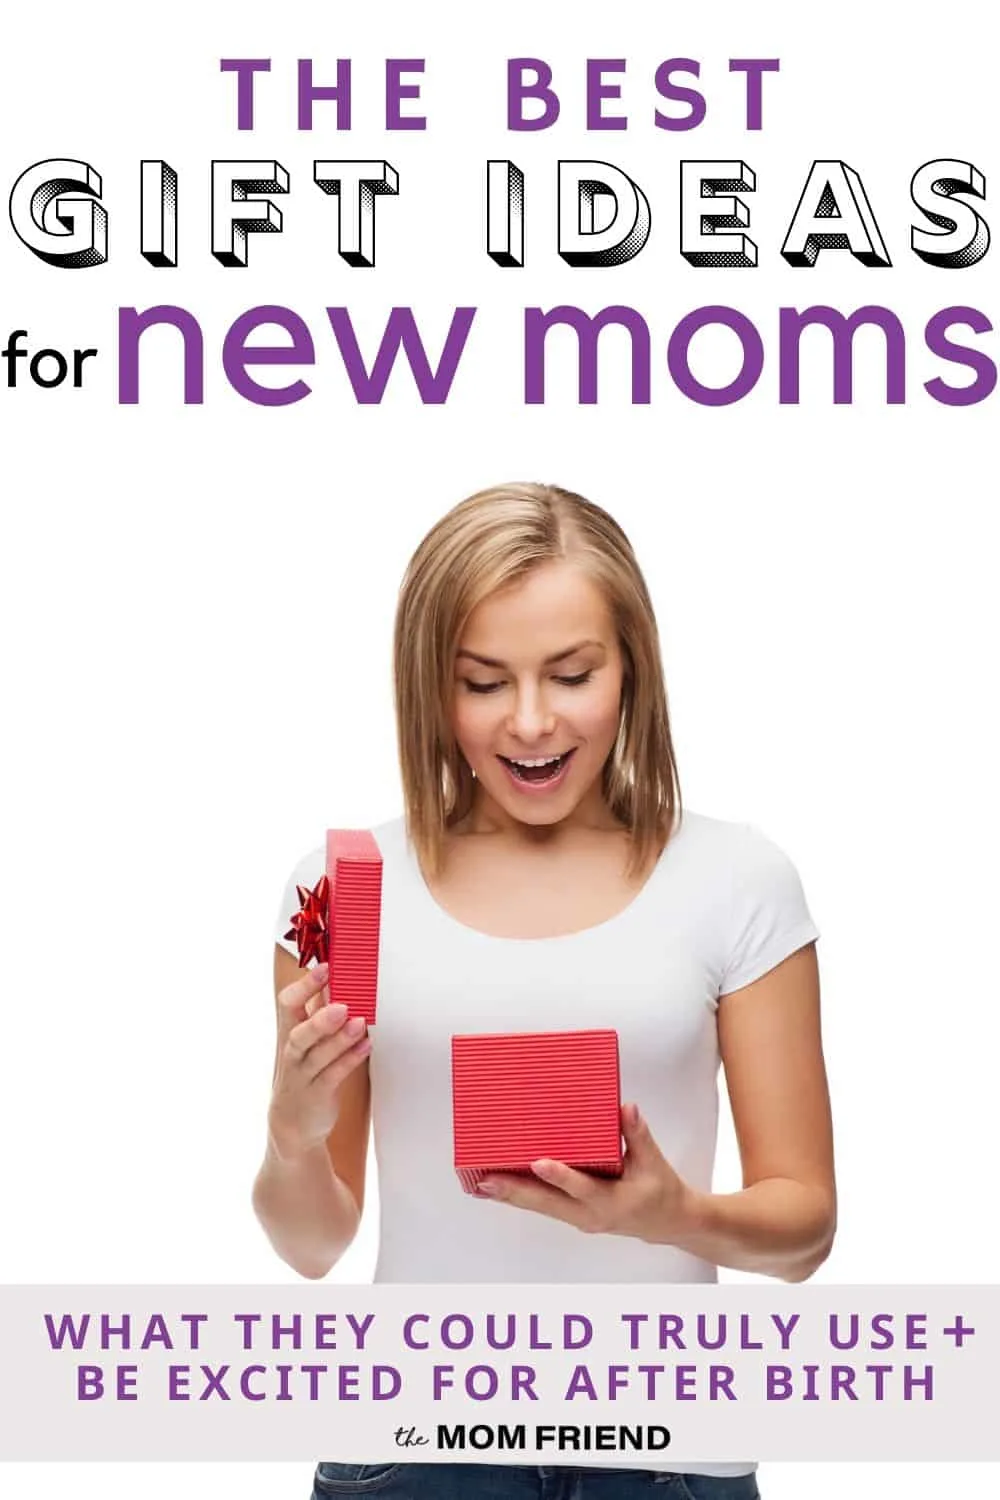 Pinnable image of gifts for new moms.